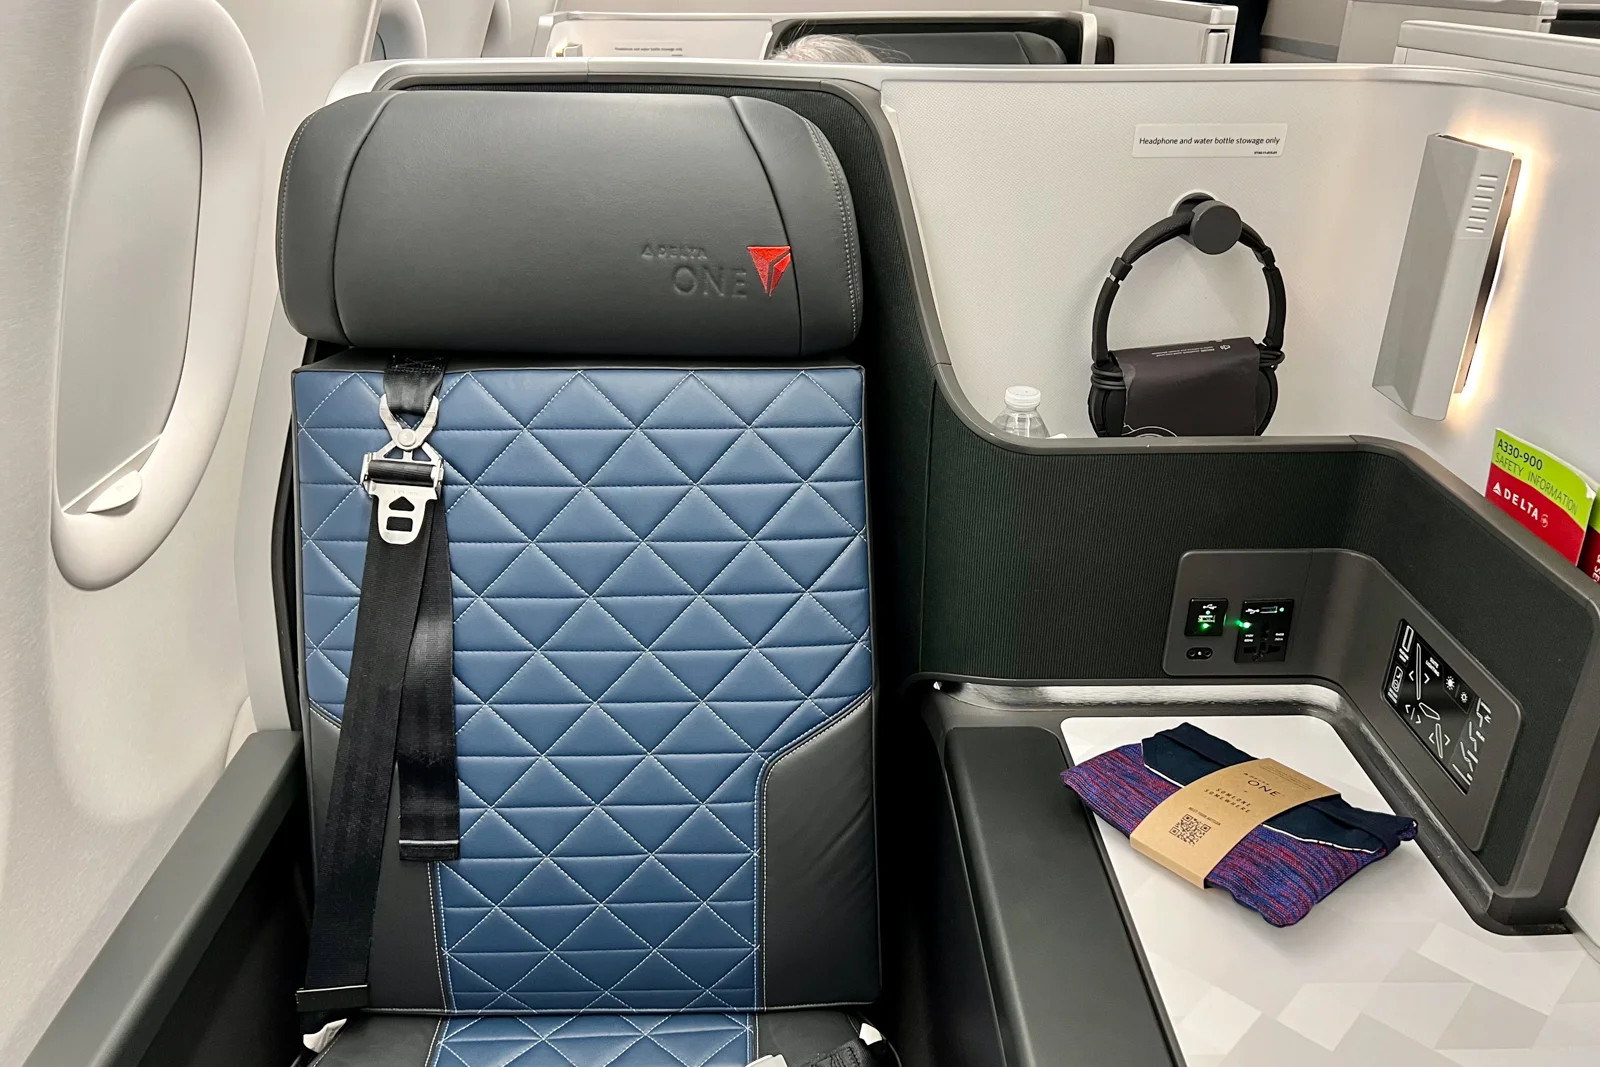 The good news is that you can now use your online Delta upgrade certificates.